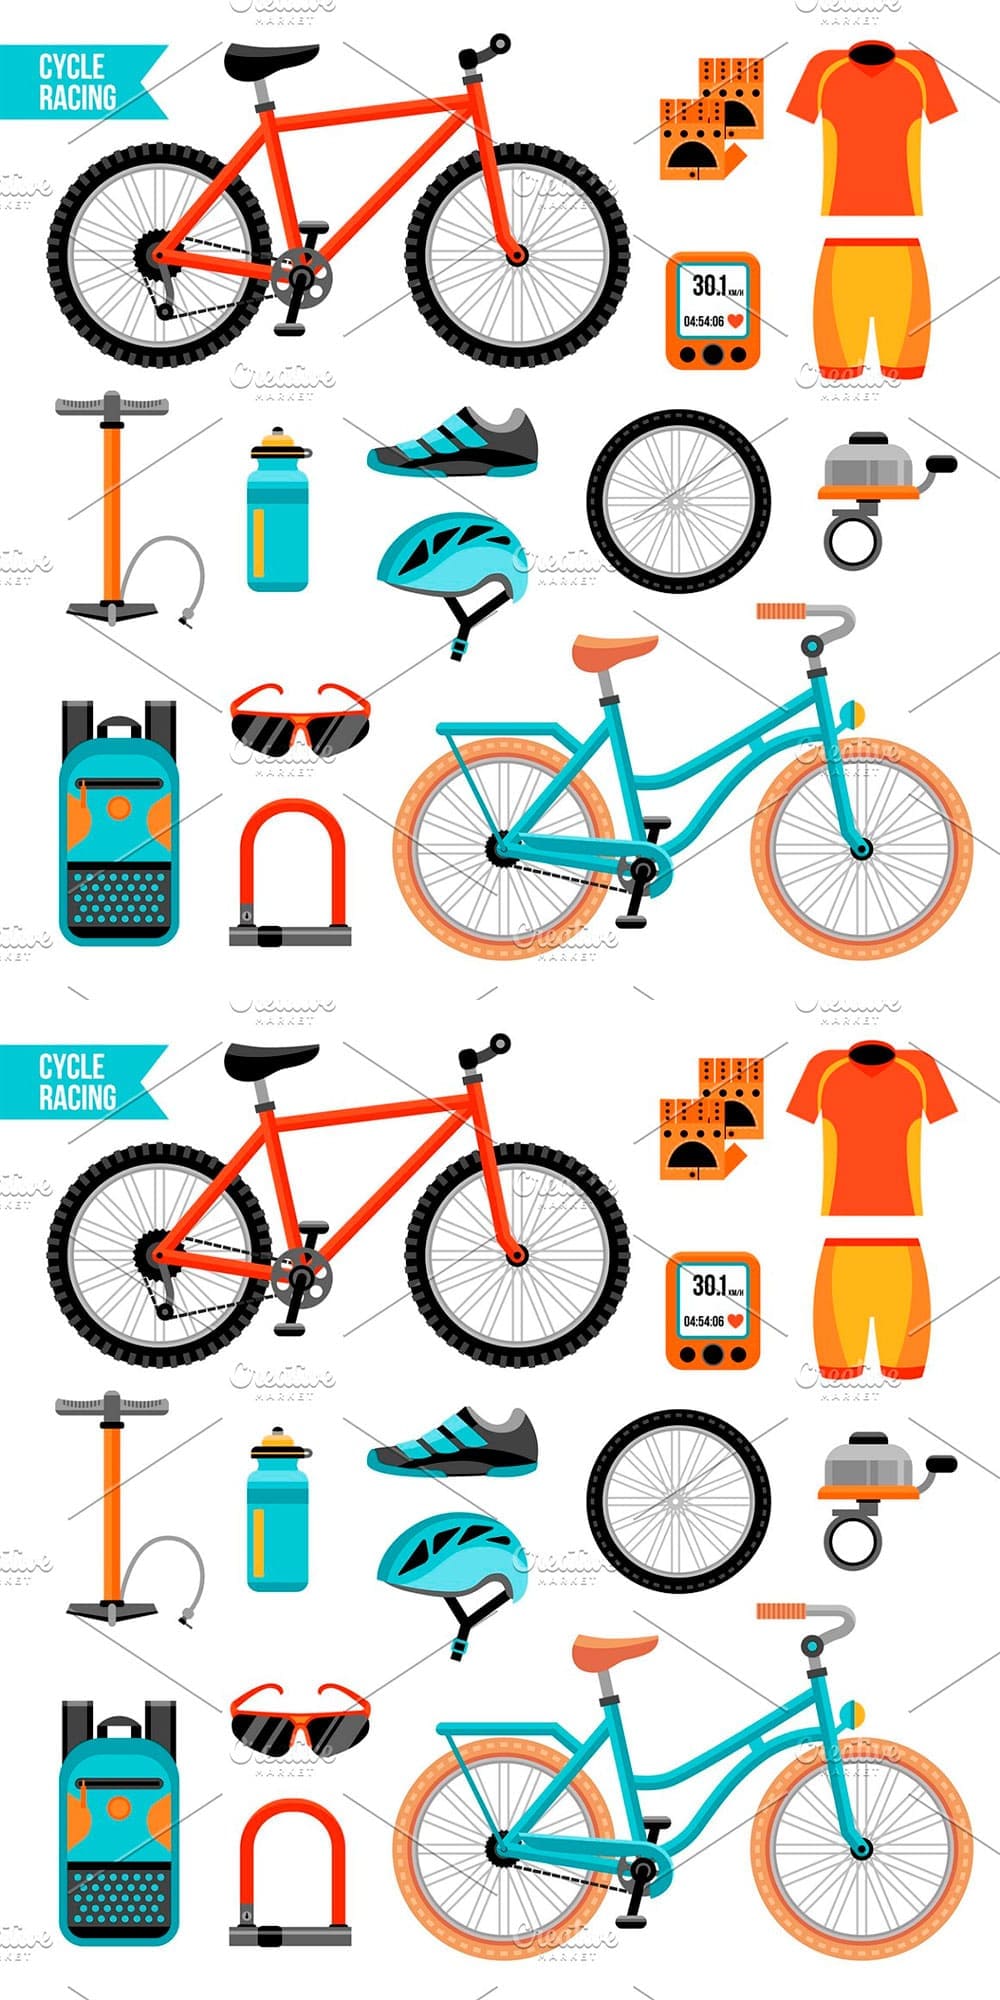 Bike and cycling accessories icons, picture for pinterest.